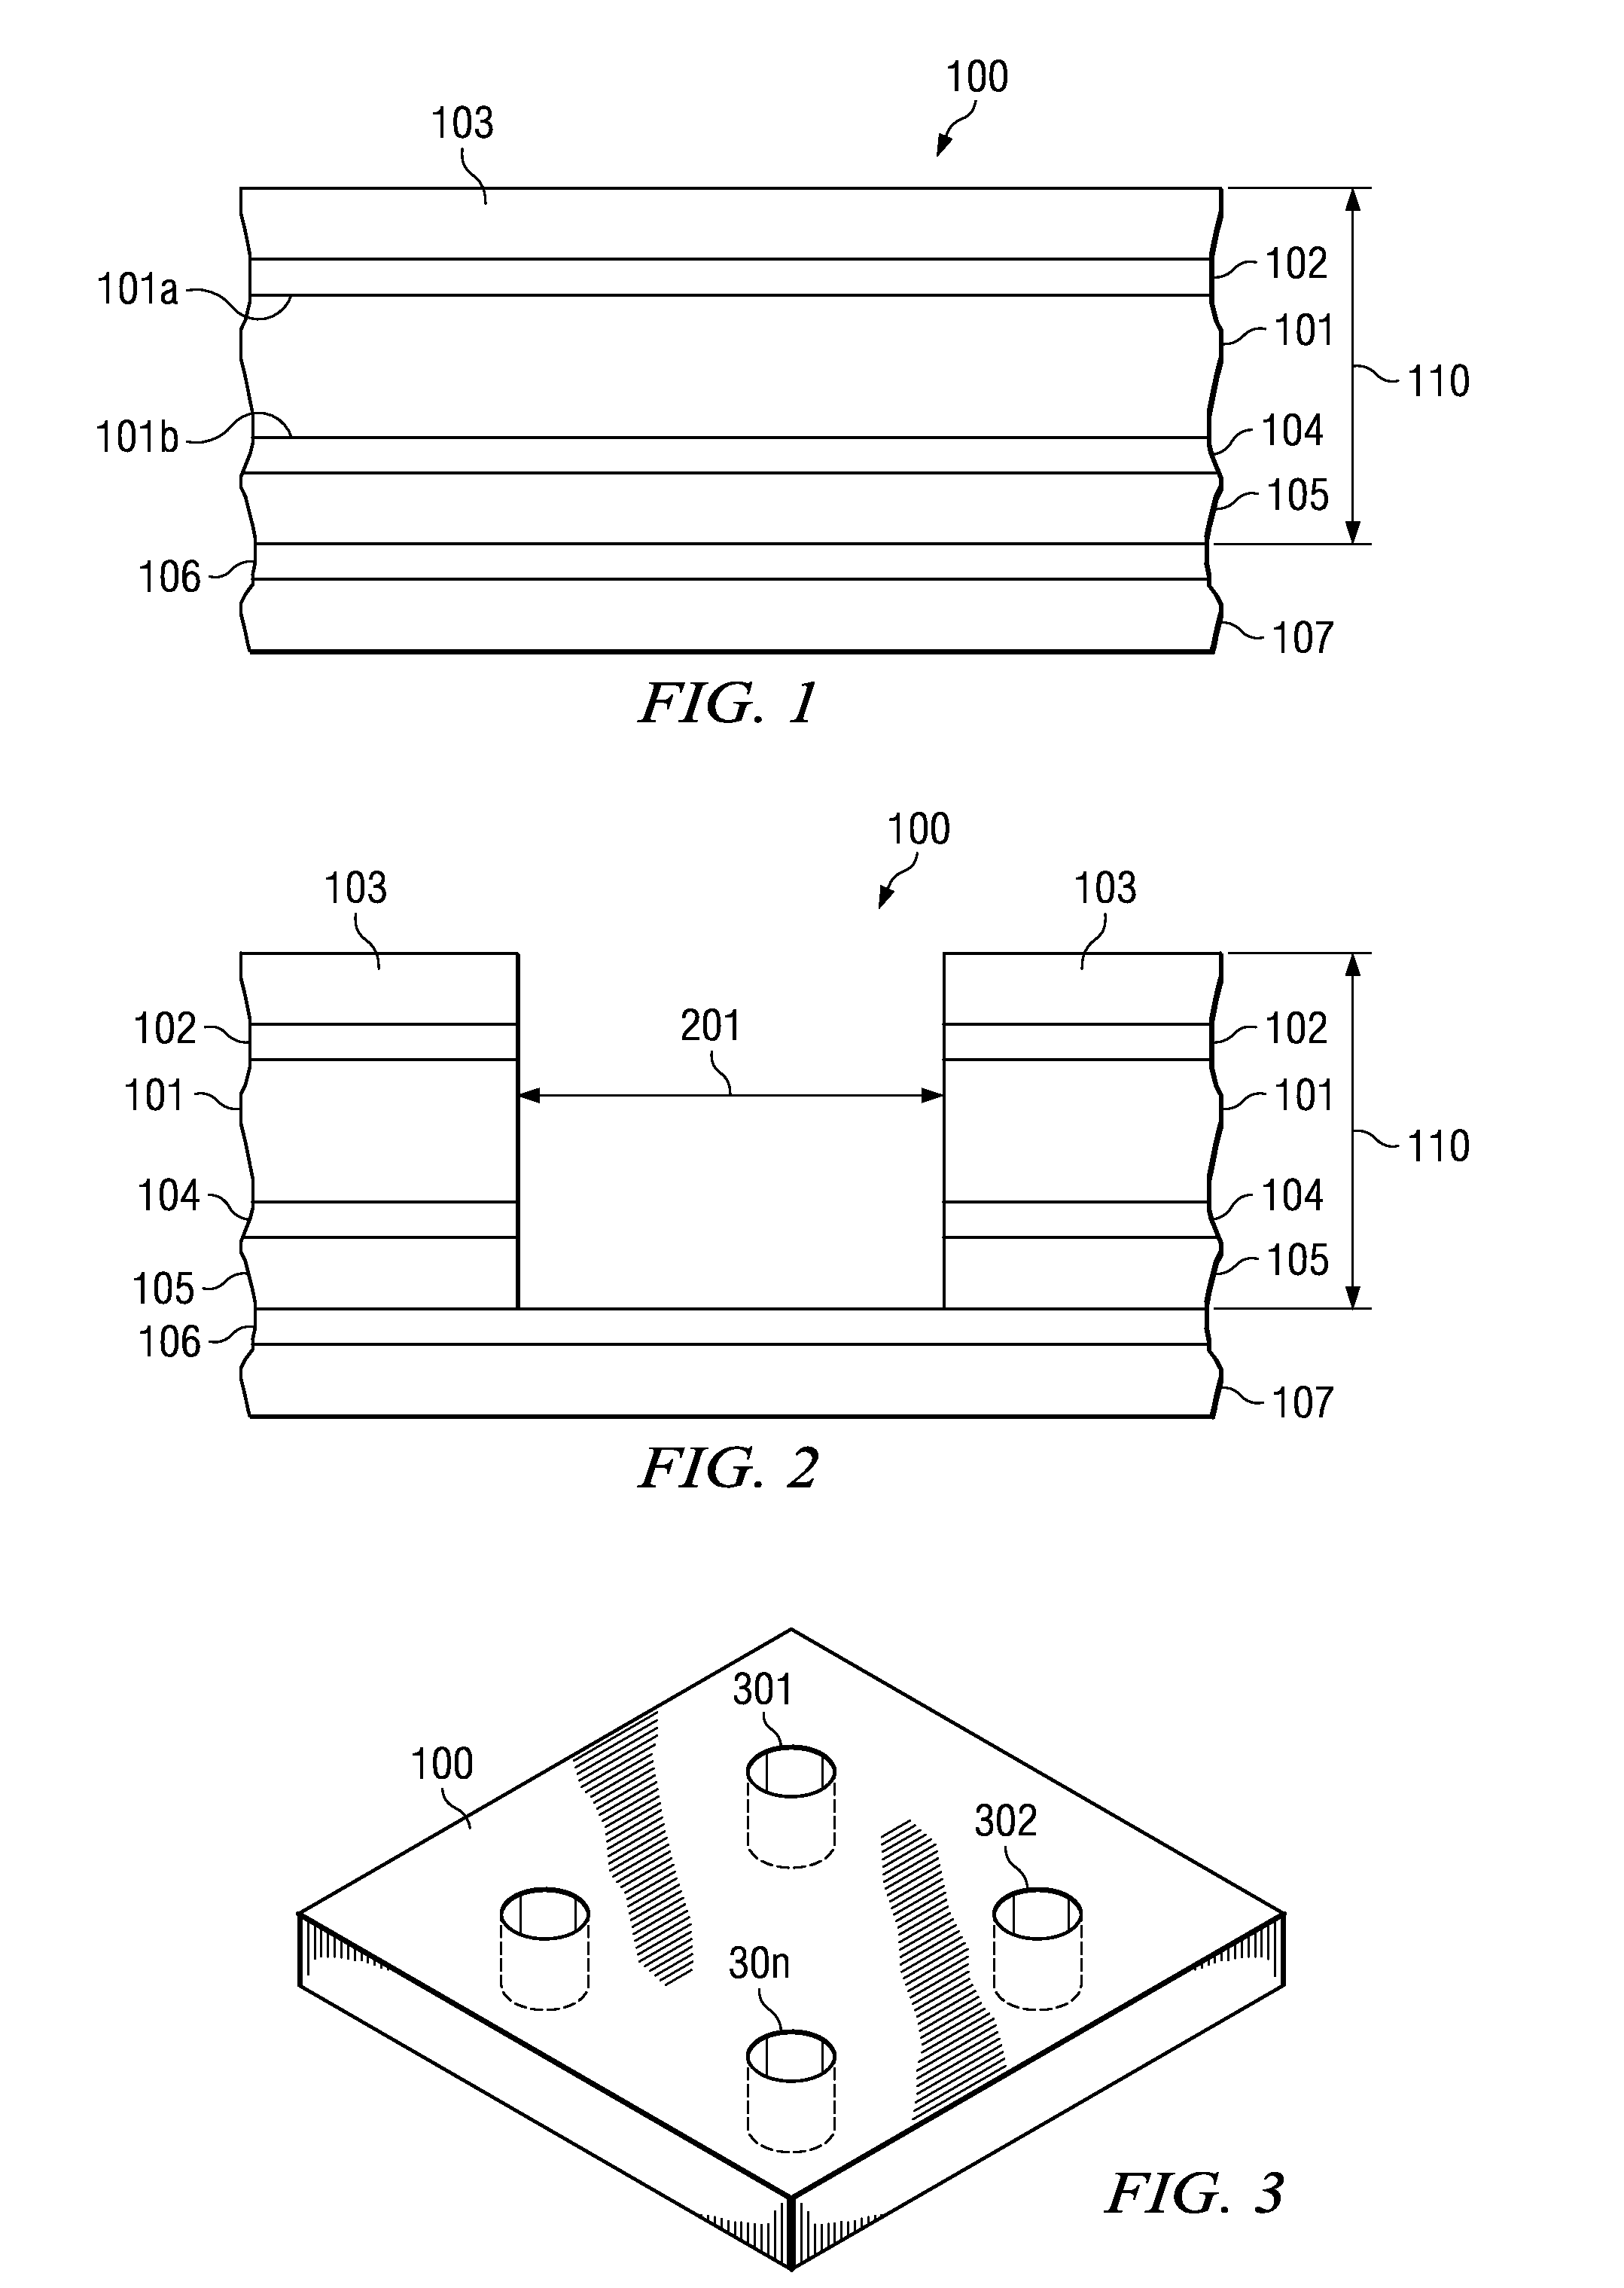 Method for Fabricating Flip-Attached and Underfilled Semiconductor Devices